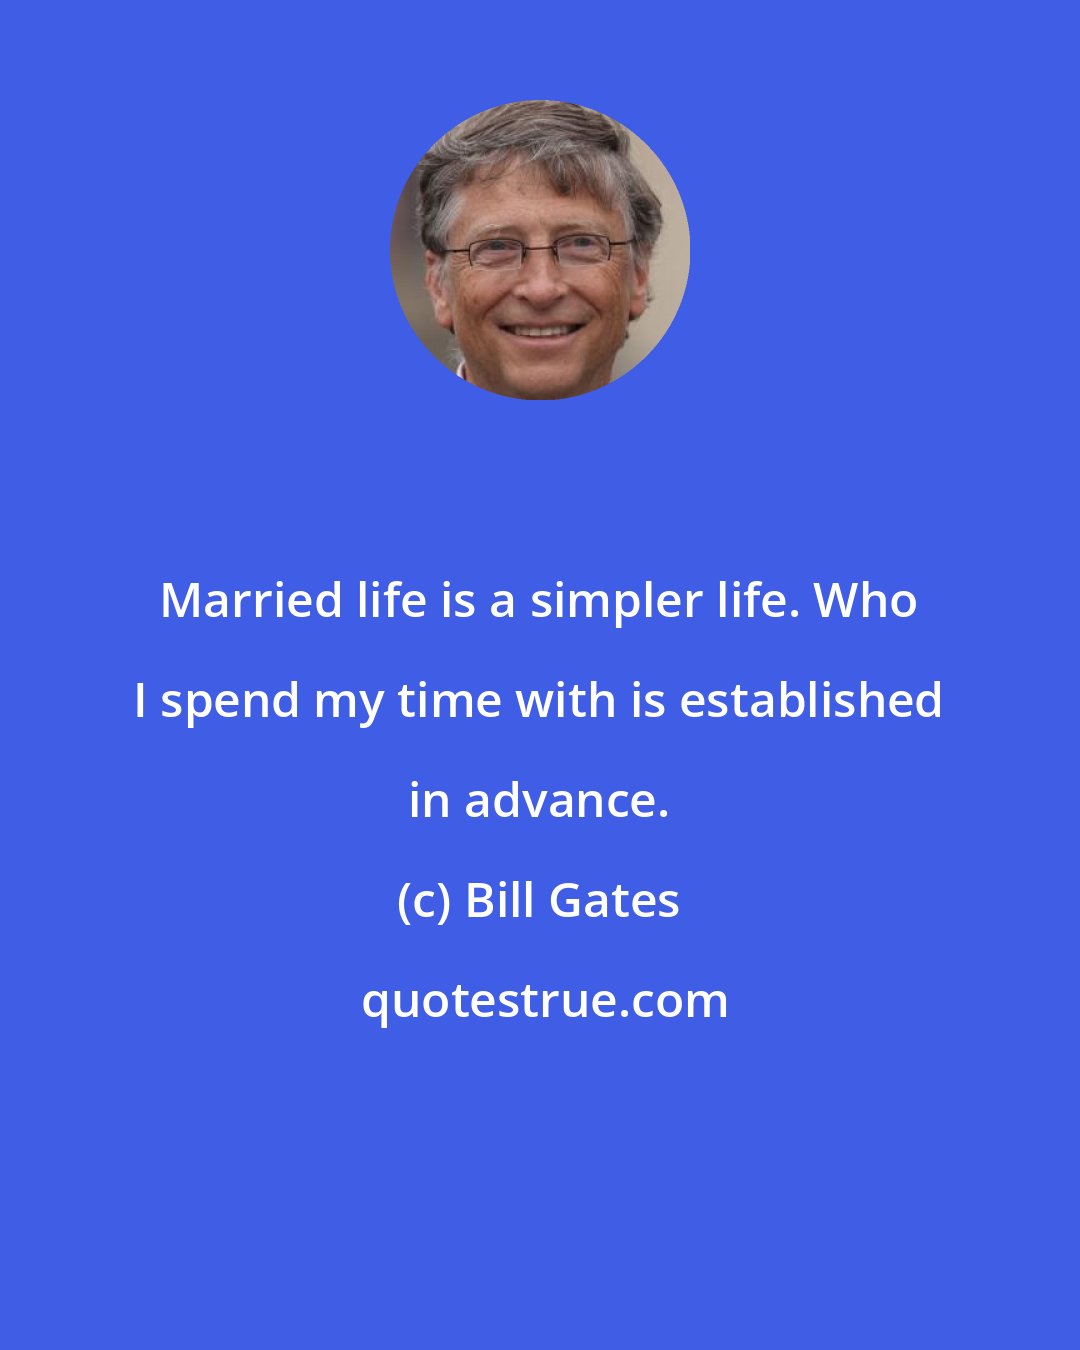 Bill Gates: Married life is a simpler life. Who I spend my time with is established in advance.